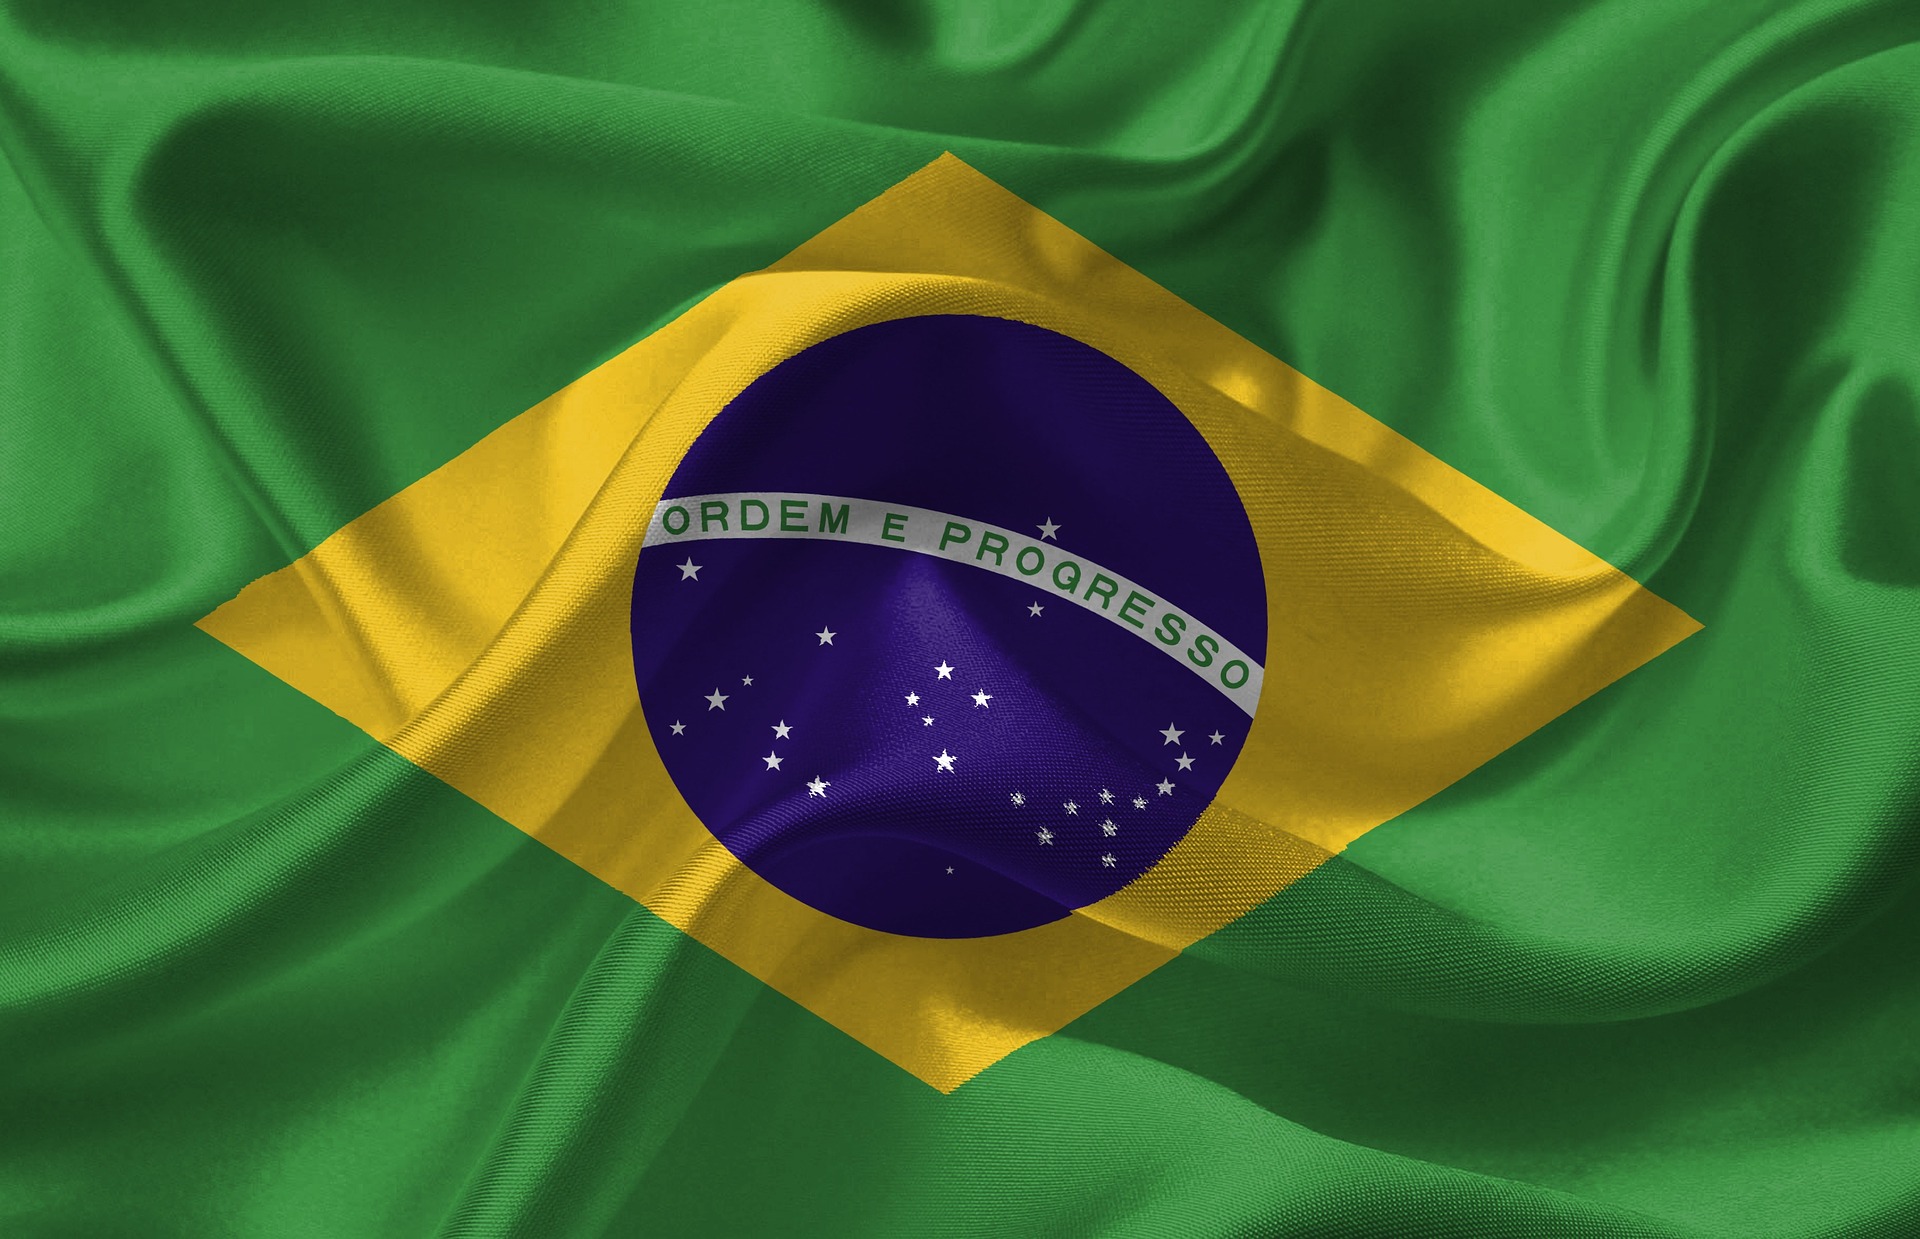 Brazil’s Investment Bank to Offer Cryptocurrency Services